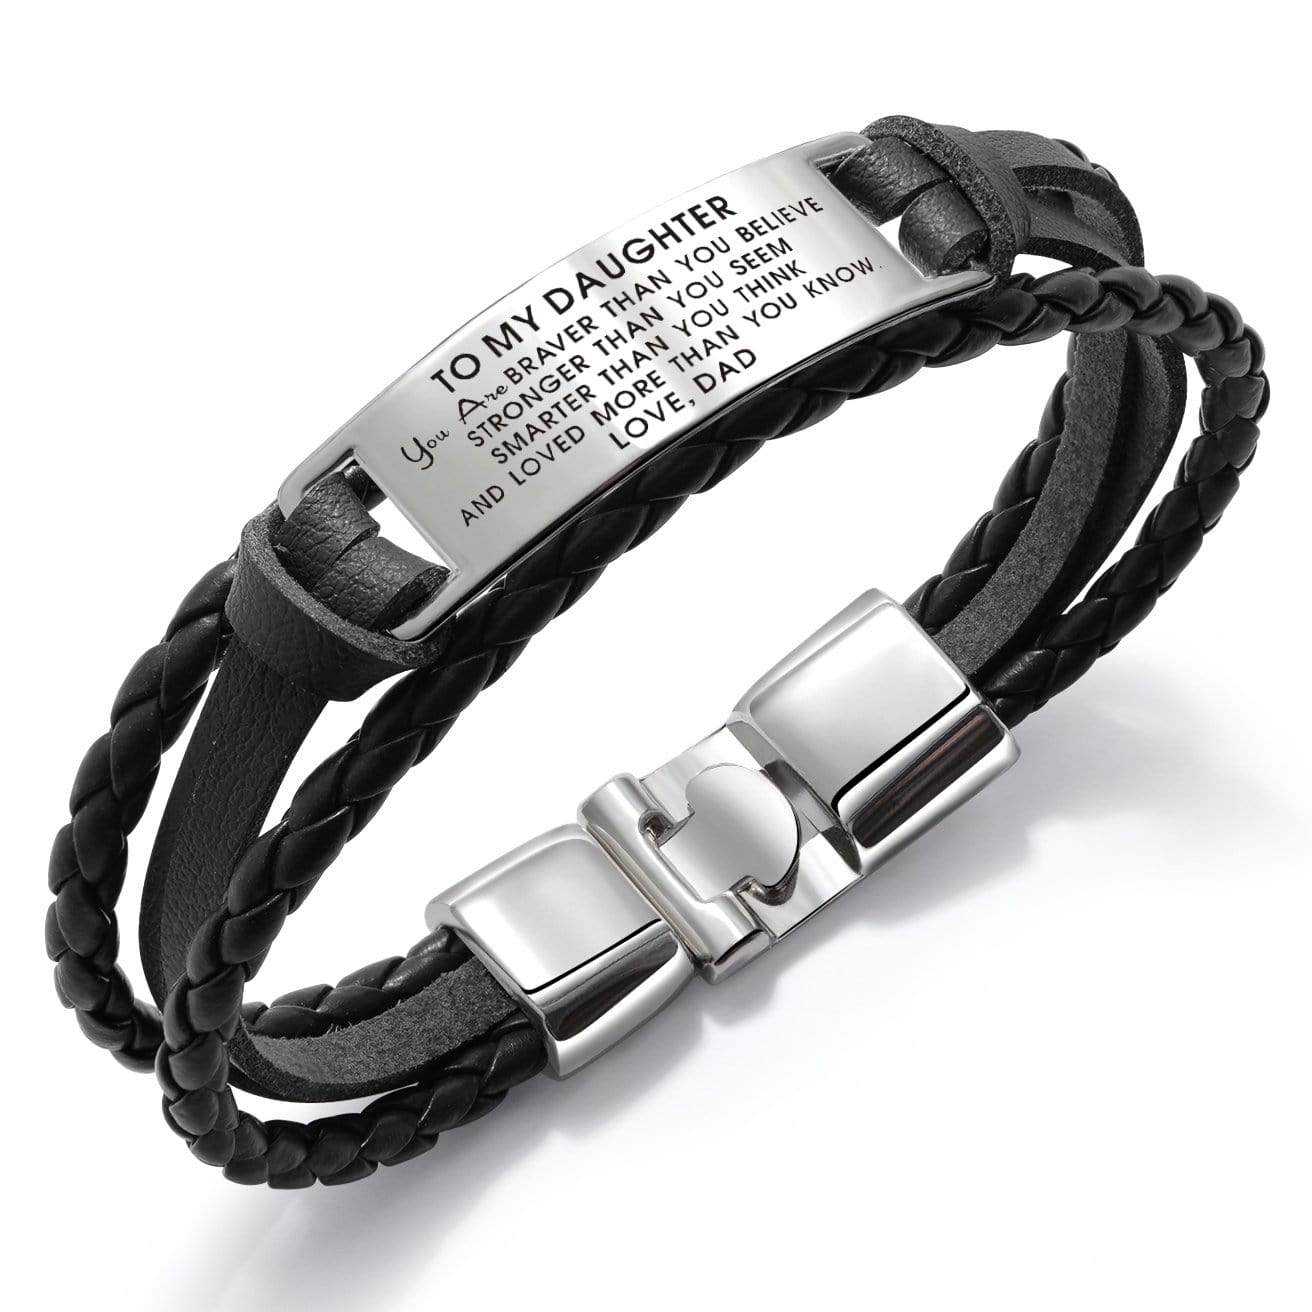 Bracelets Dad To Daughter - You Are Loved More Than You Know Leather Bracelet Black GiveMe-Gifts